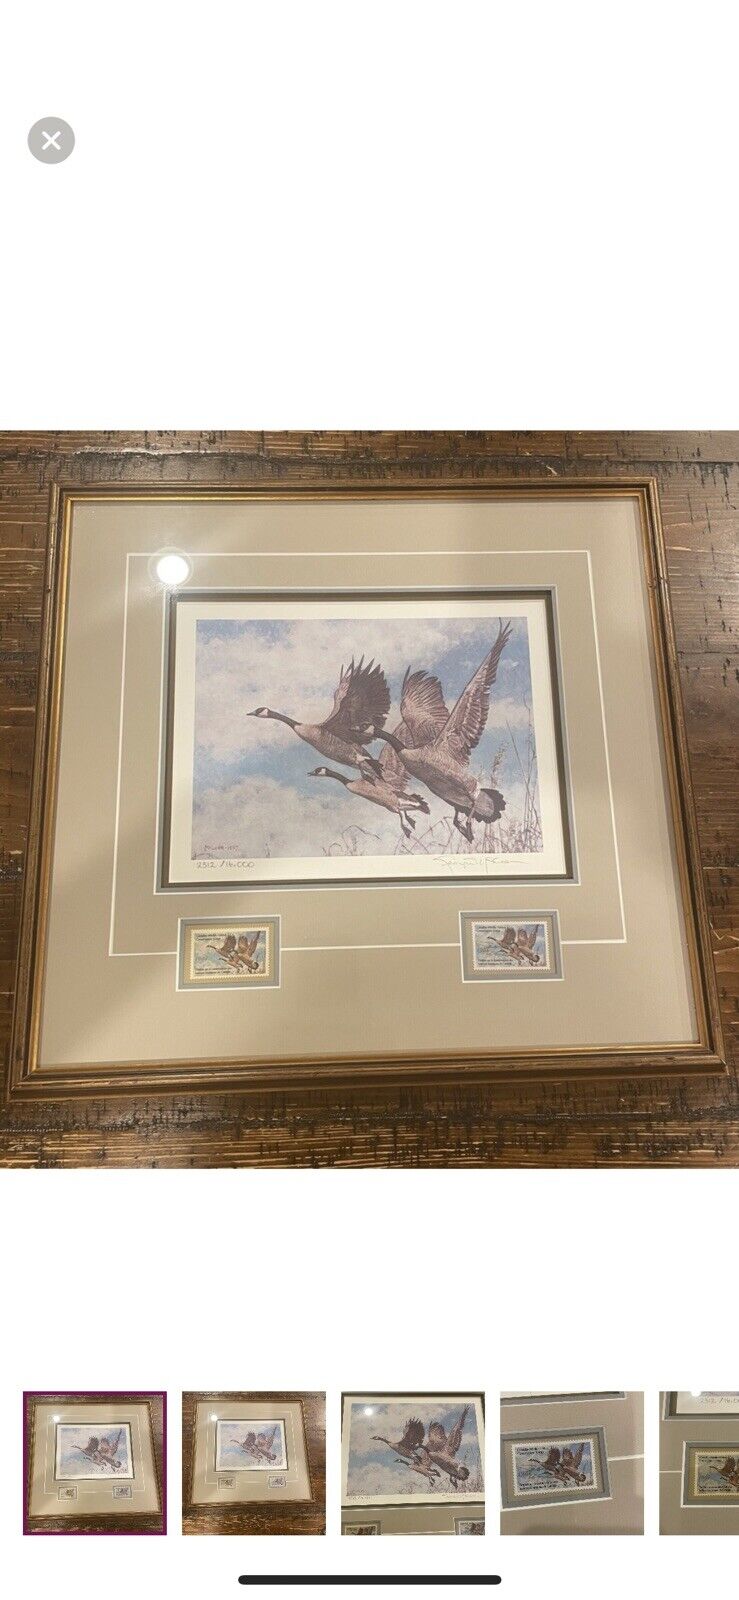 Oregon Waterfowl Geese Framed Print Stamps Signed Michael Sieves 1984